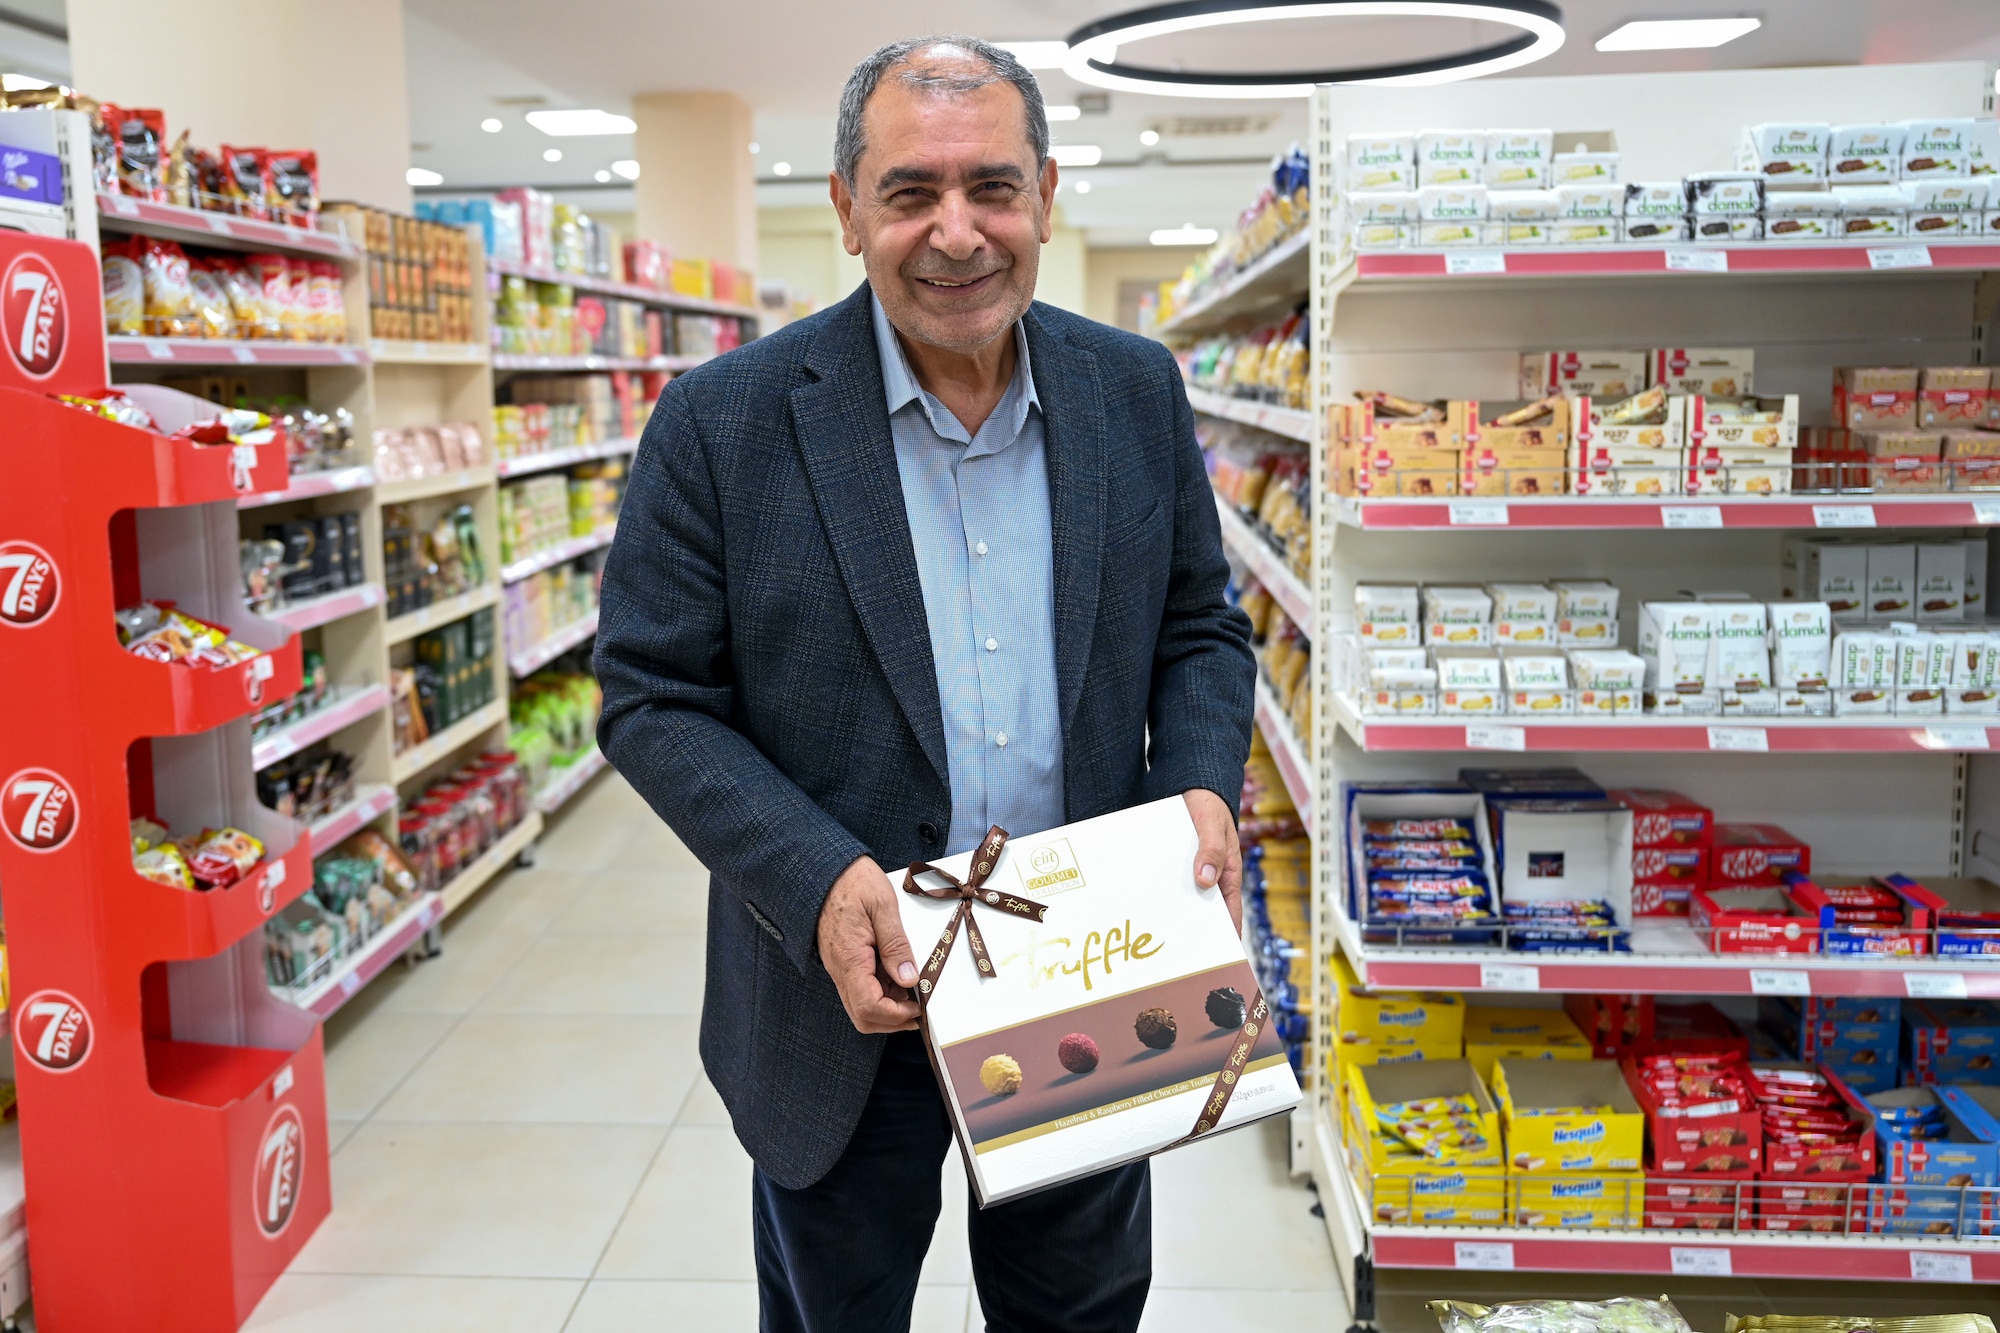 Mehmet Birbiri, 39th Air Base Wing Public Affairs host nation advisor, showcases gifts that are commonly given during the 3 ½-day Sugar Festival at Incirlik Air Base, Türkiye, April 13, 2023.